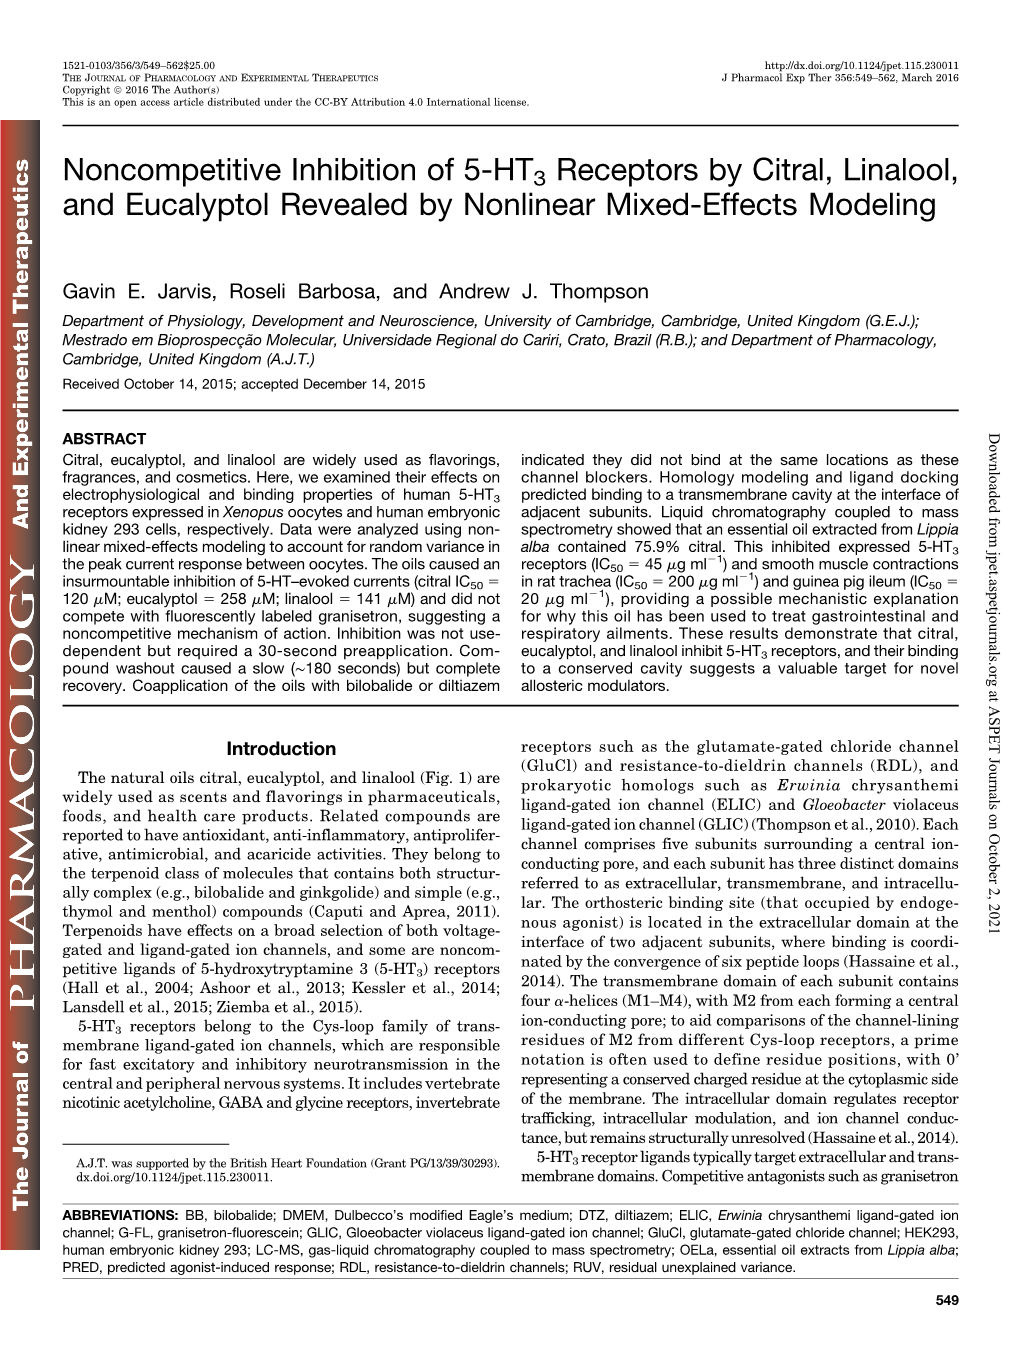 Noncompetitive Inhibition of 5-HT3 Receptors by Citral, Linalool, and Eucalyptol Revealed by Nonlinear Mixed-Effects Modeling